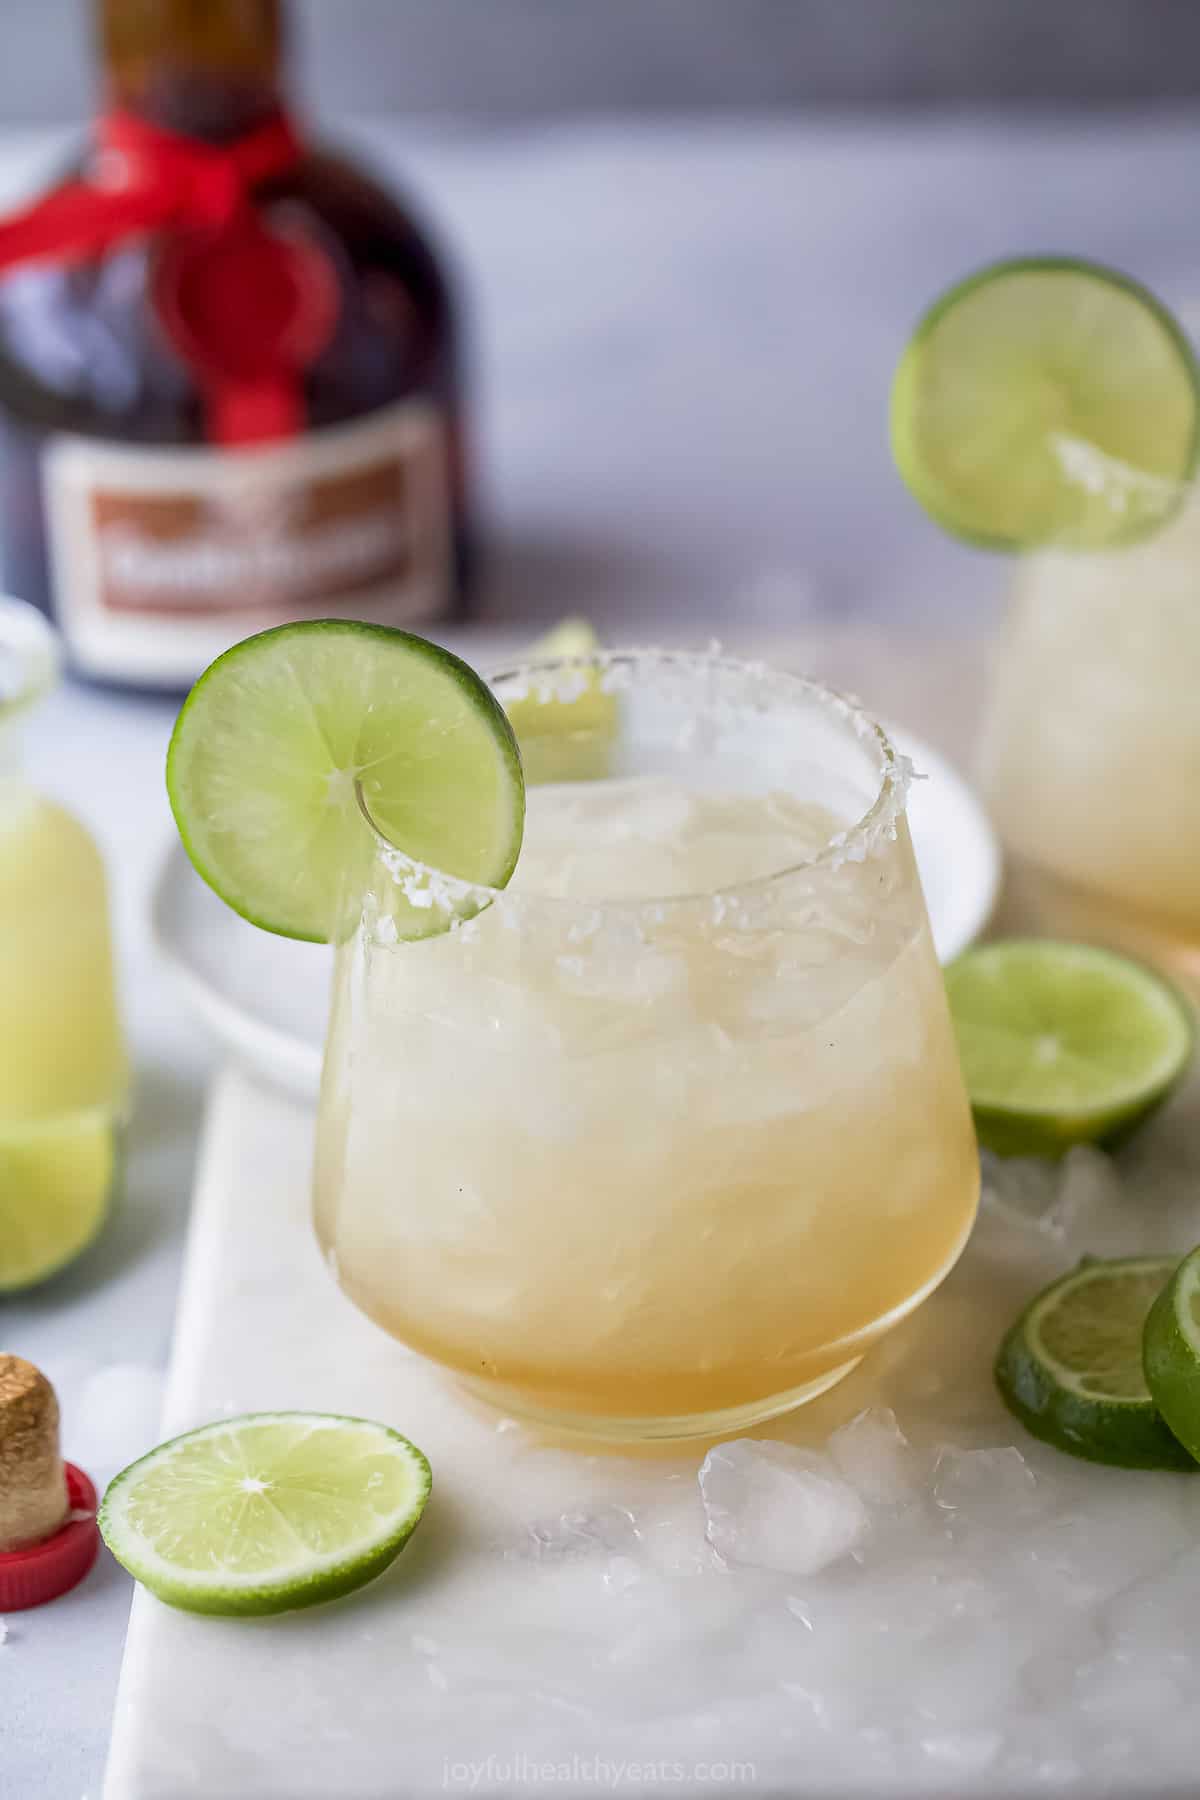 Cadillac margarita with a salt rim and a lime wedge.